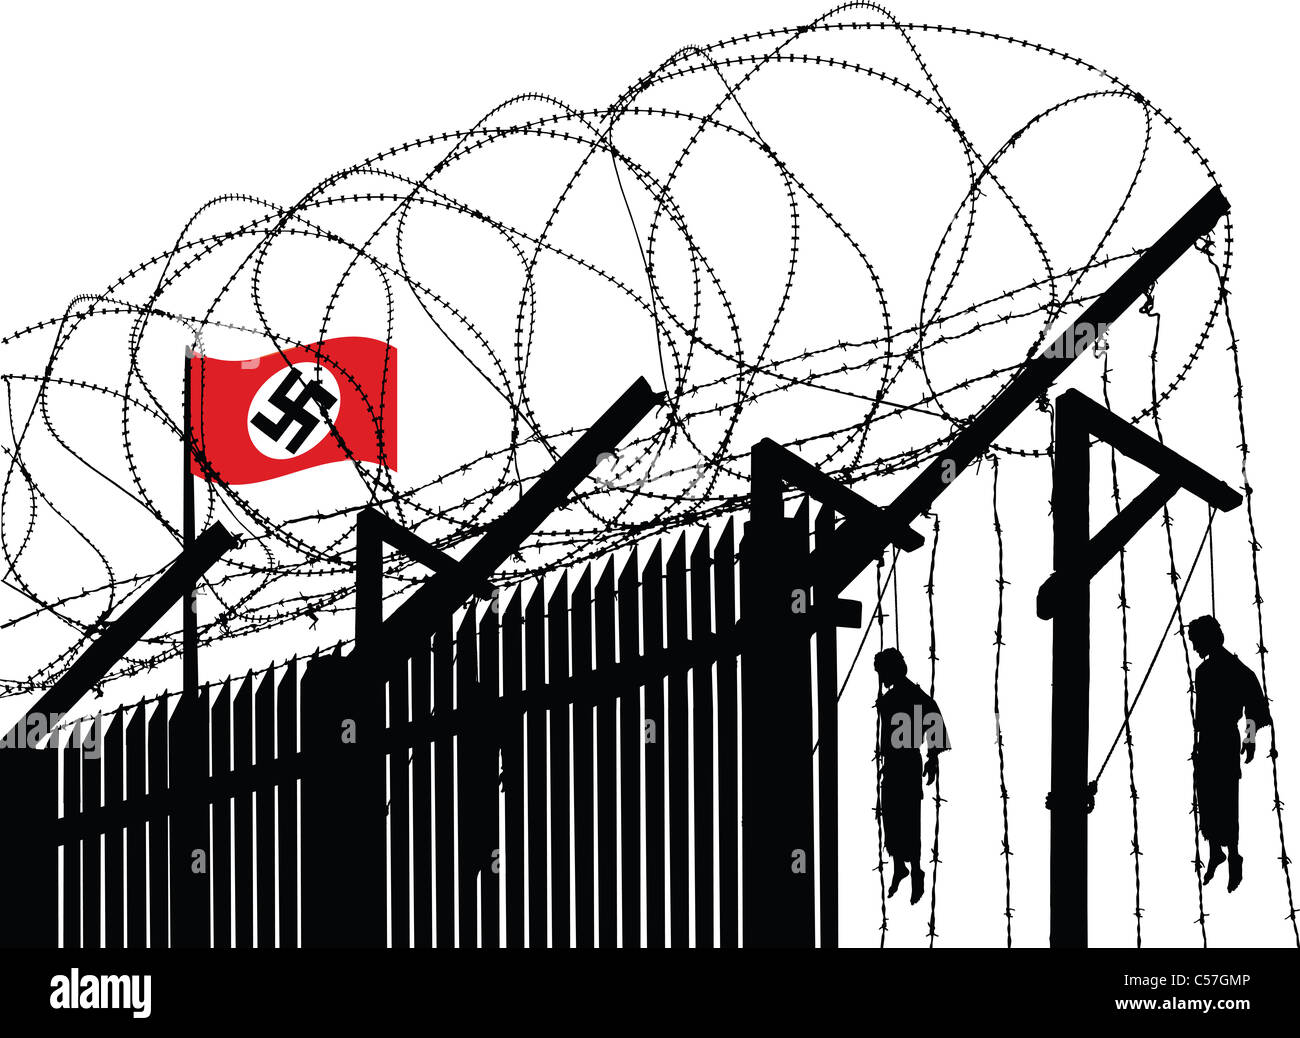 Vector illusration of german concentration camp fence topped with barbed wire and hanged people in background Stock Photo